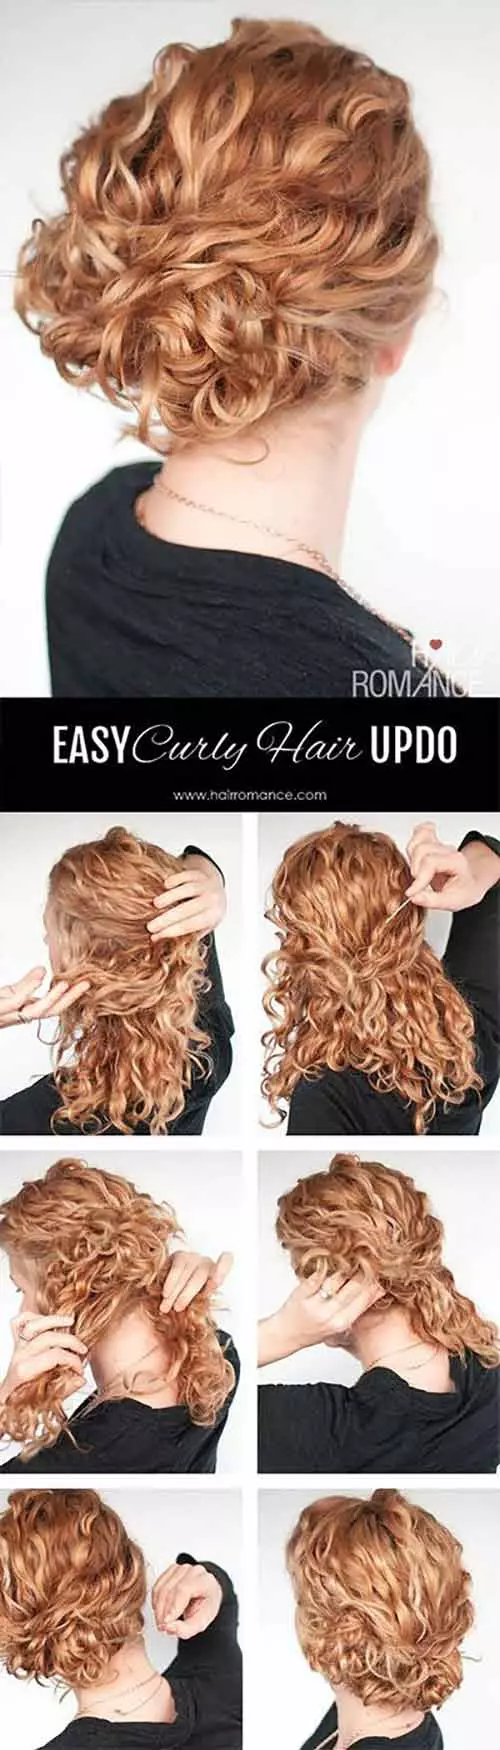 Messy romantic updo for curly hair